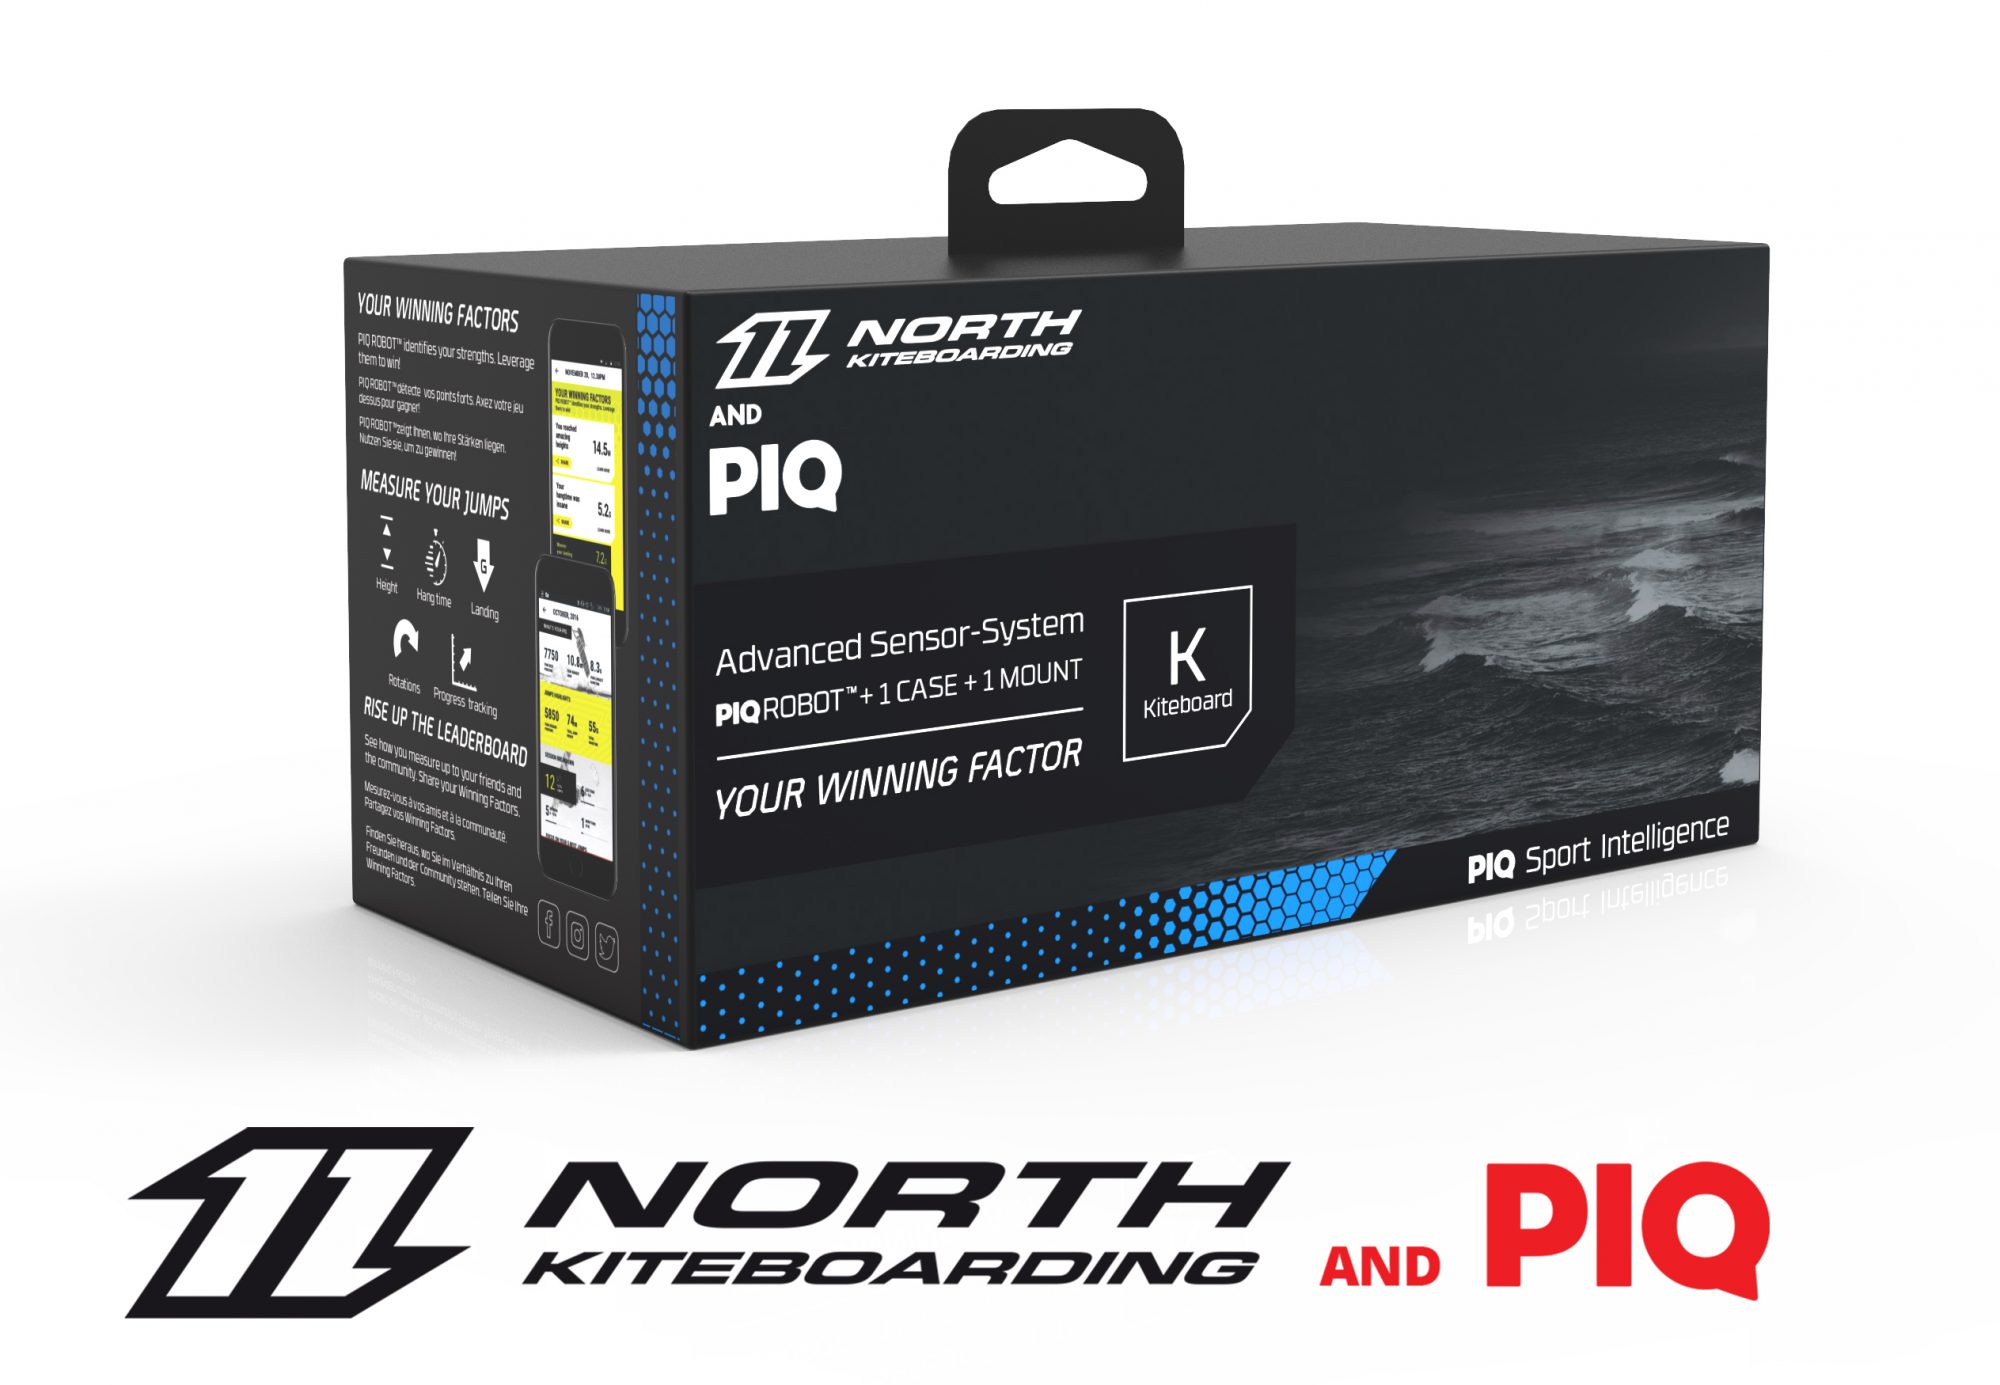 north and piq packaging01 2 - WIN A PIQ!